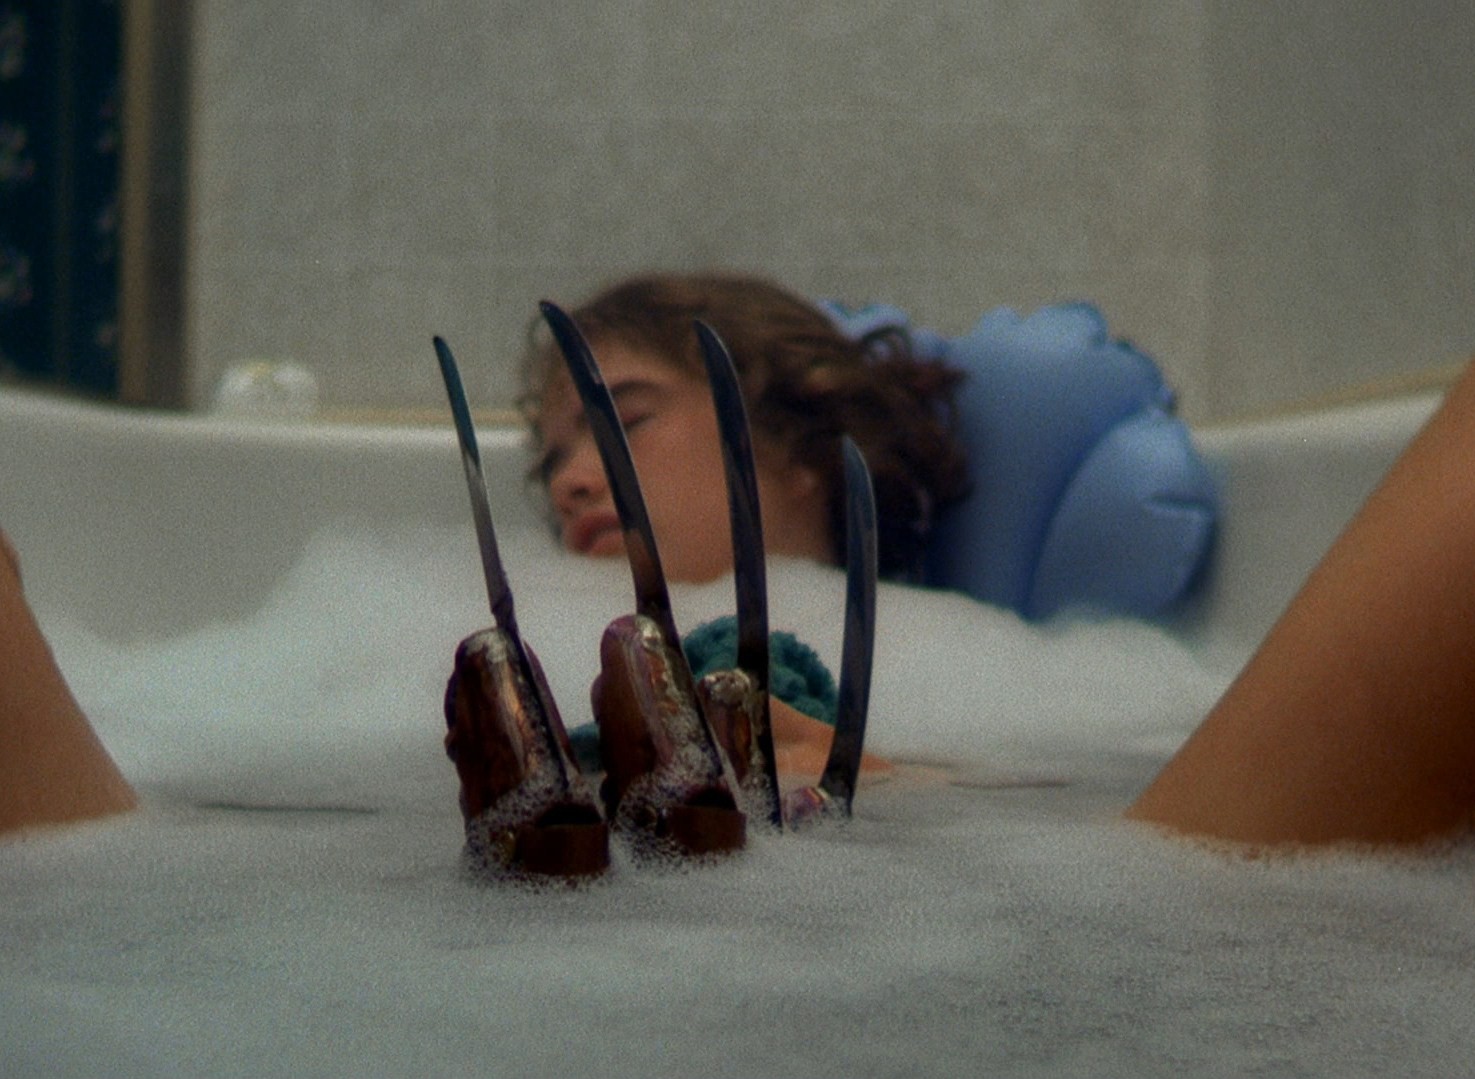 Freddy's claws emerge as Heather Langenkamp drifts off in the bath in A Nightmare on Elm Street (1984)